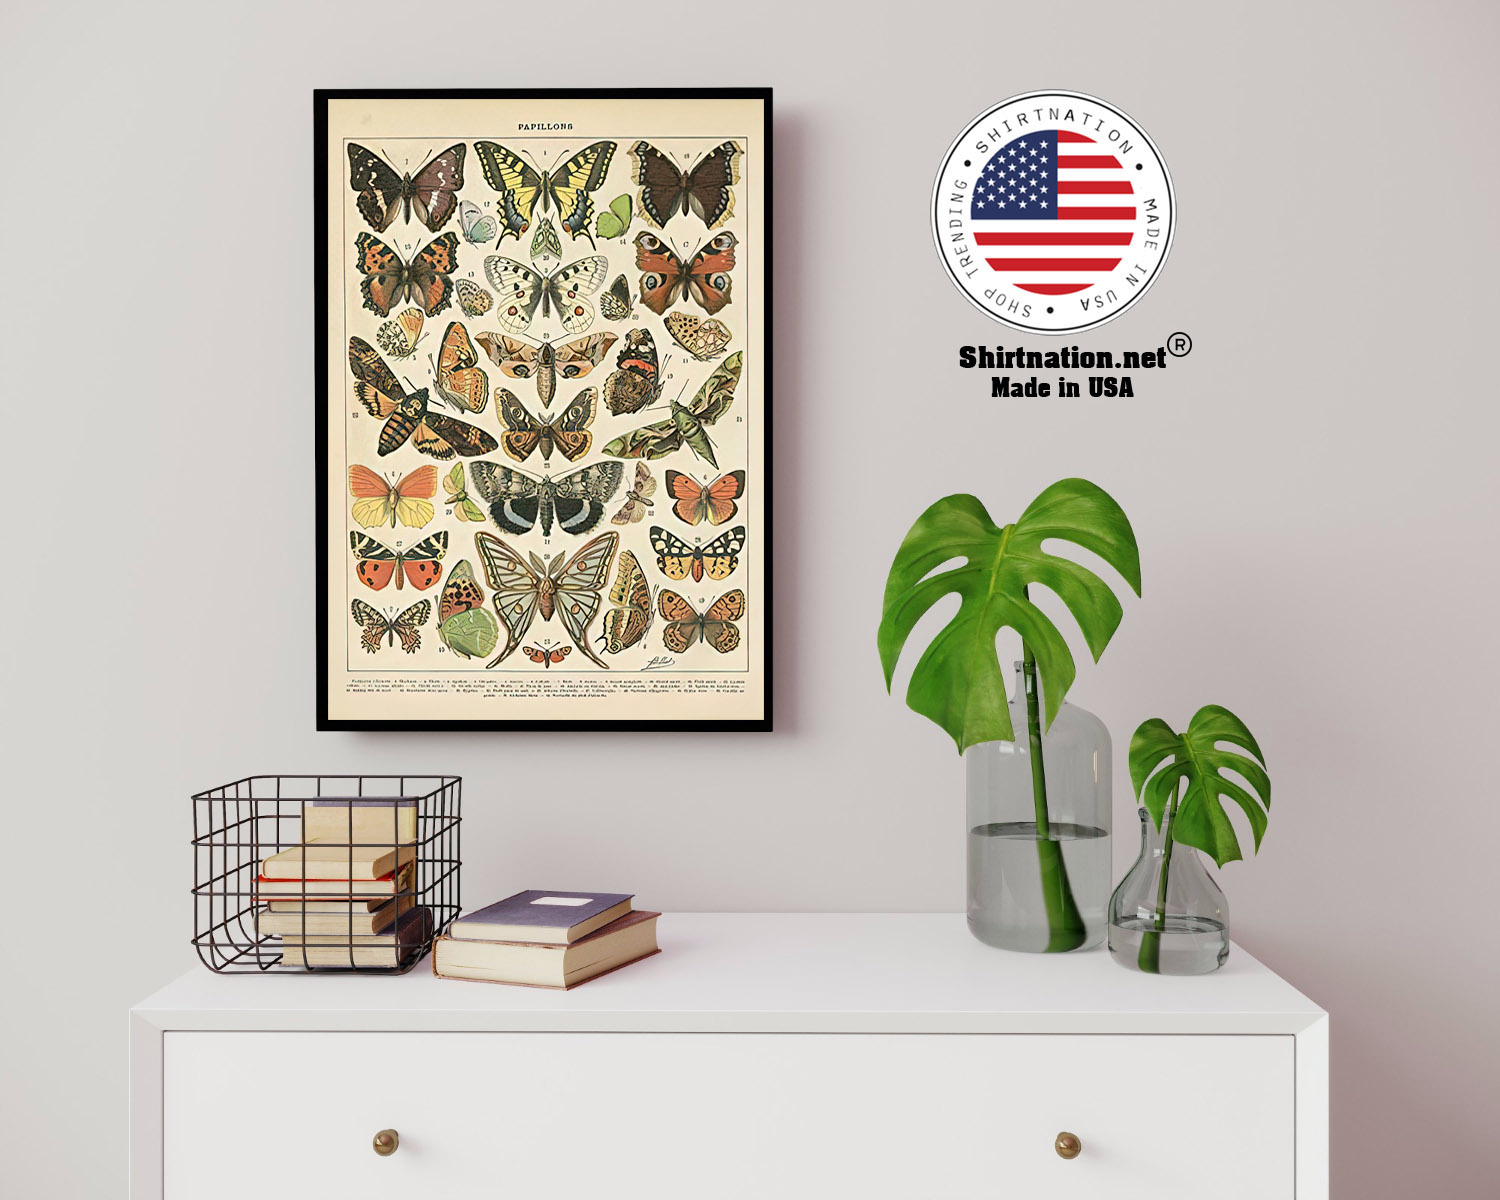 Popular vintage french types of papillons butterflies poster 14